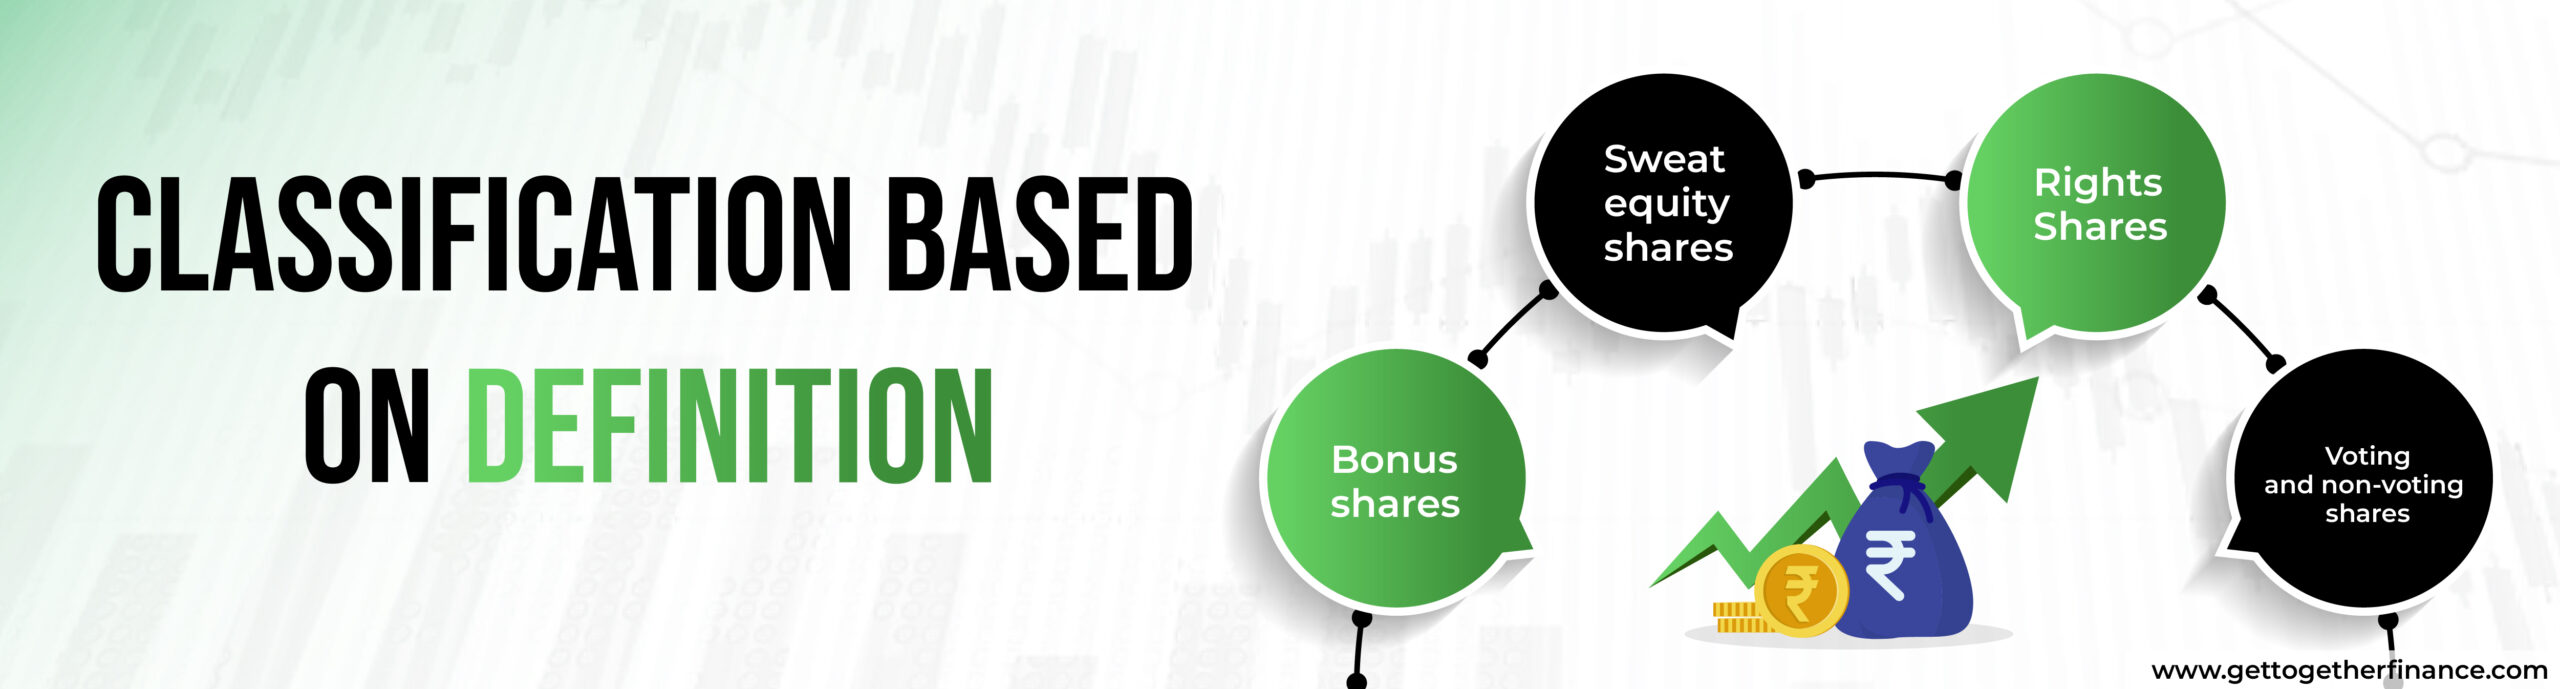 classification of shares based on definition